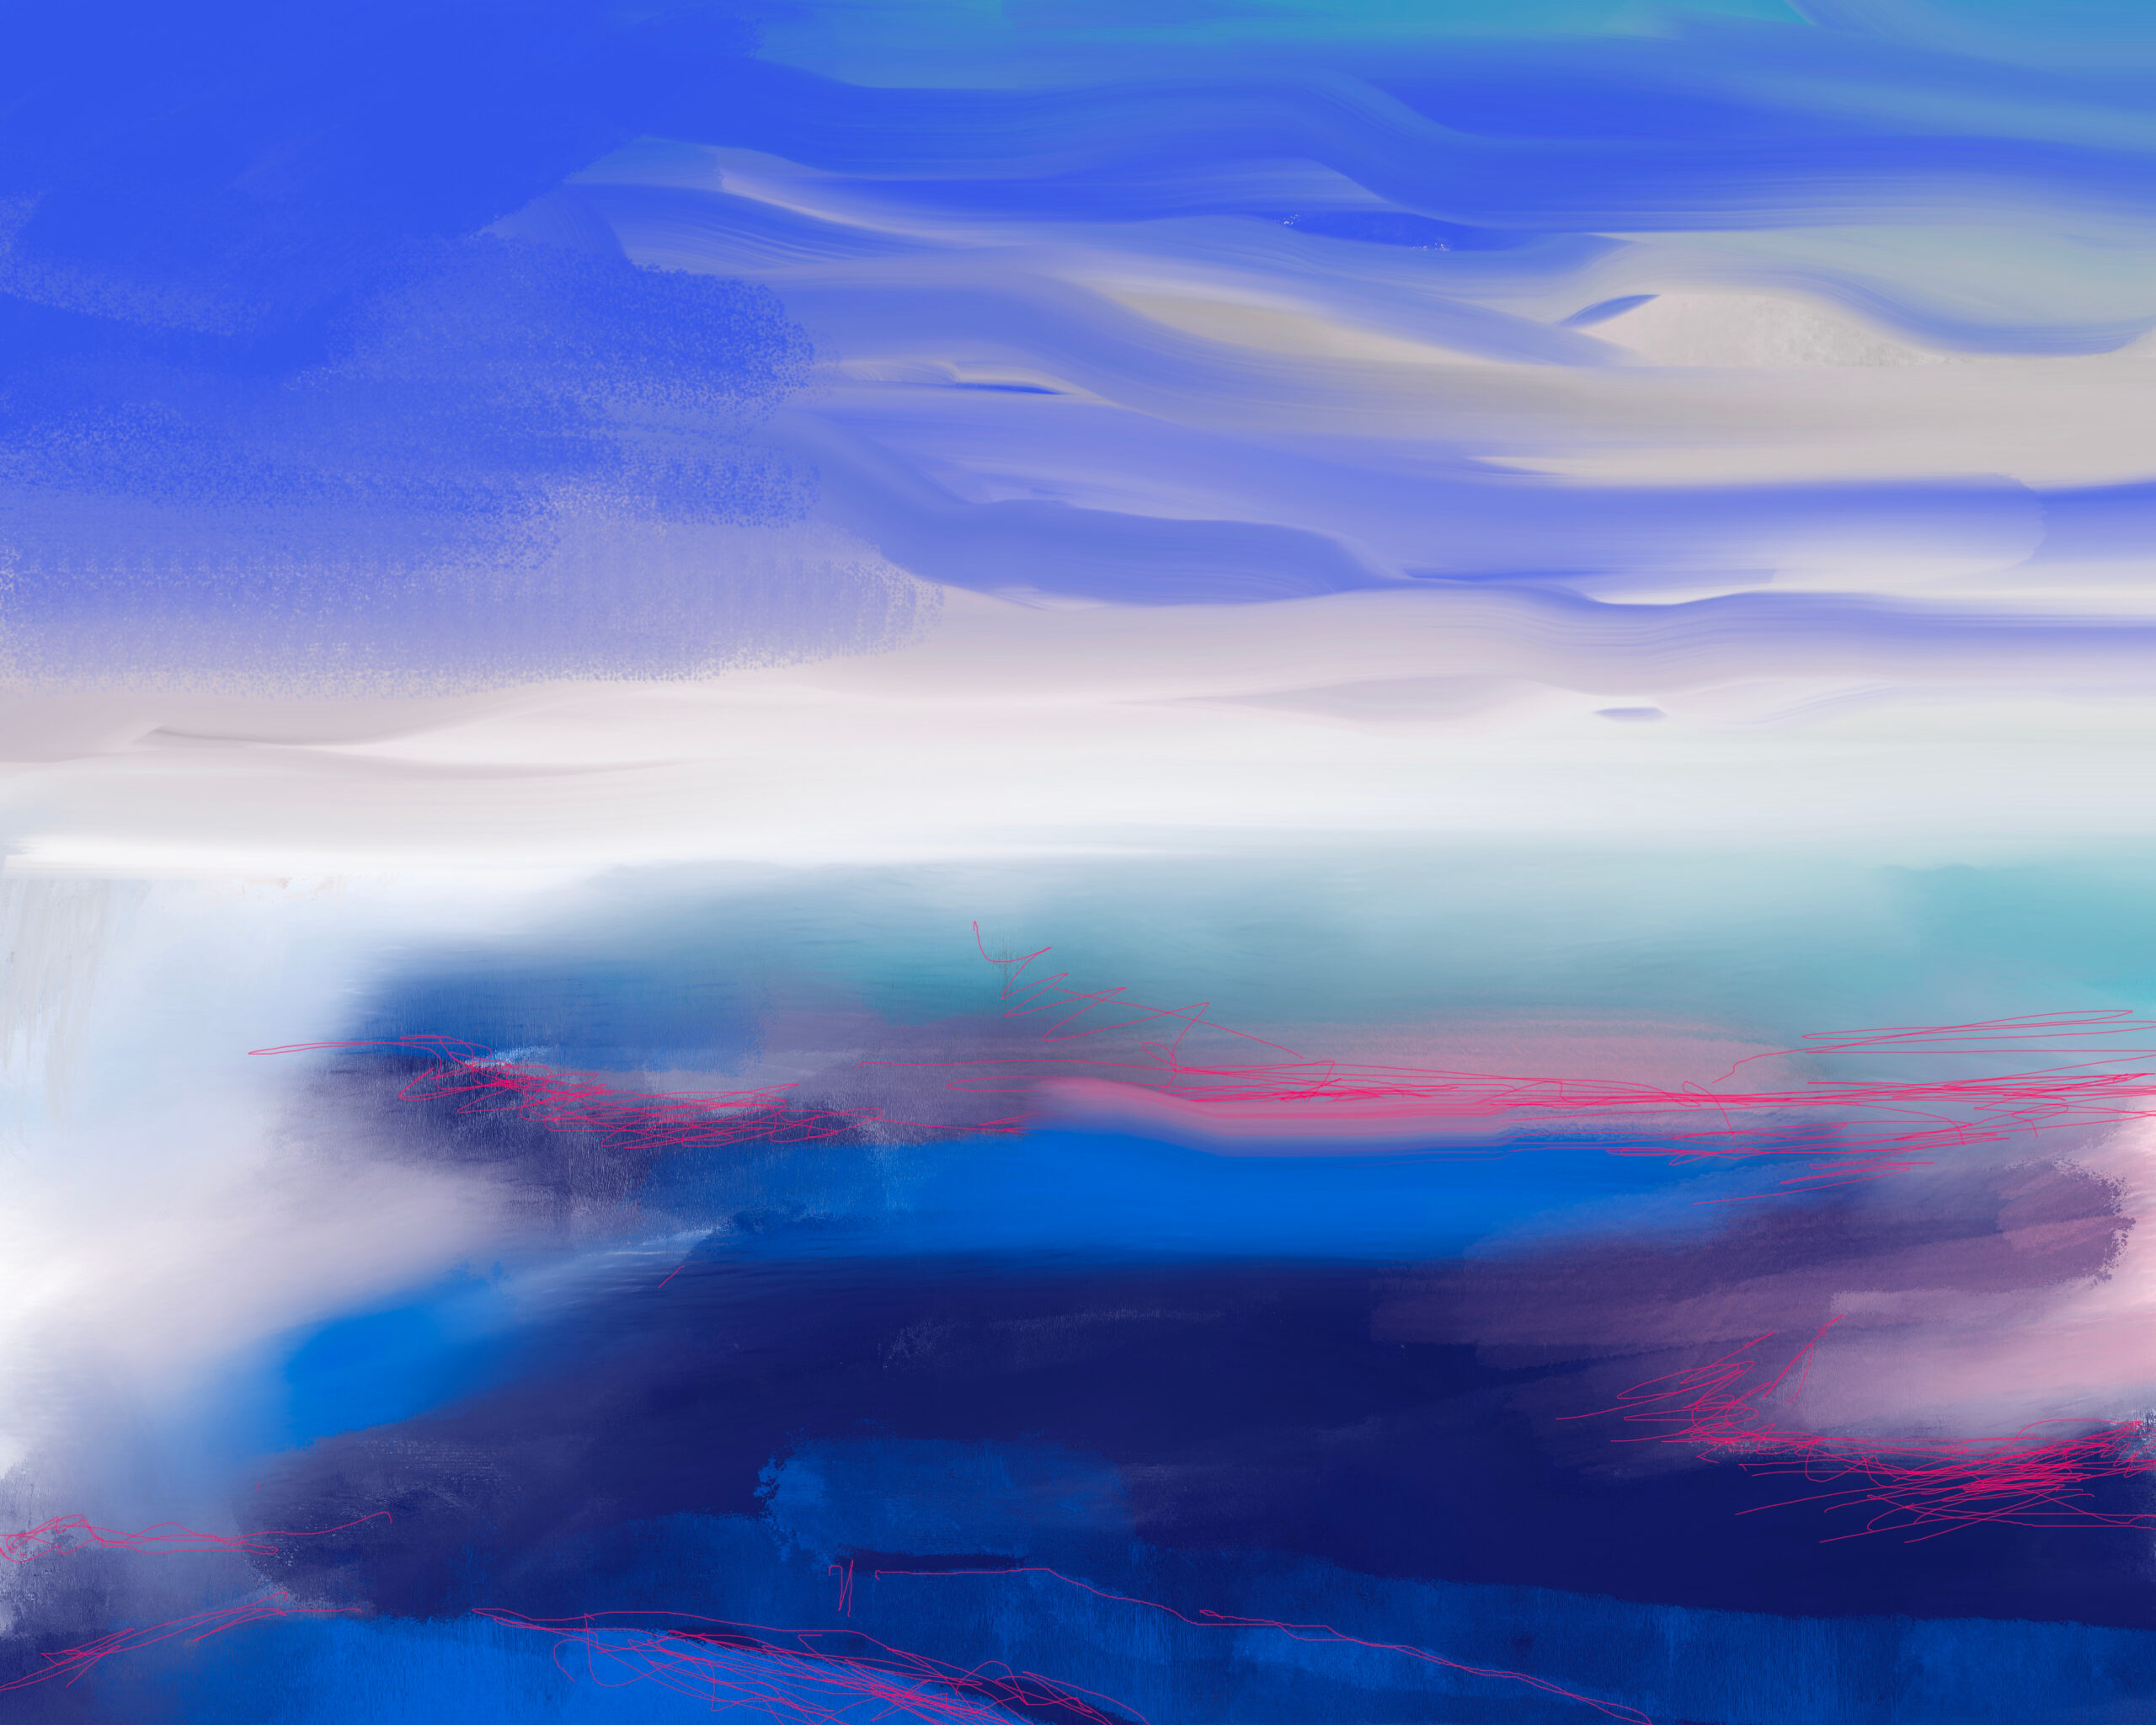 violet blue sky and abstract headland with radiant white horizon